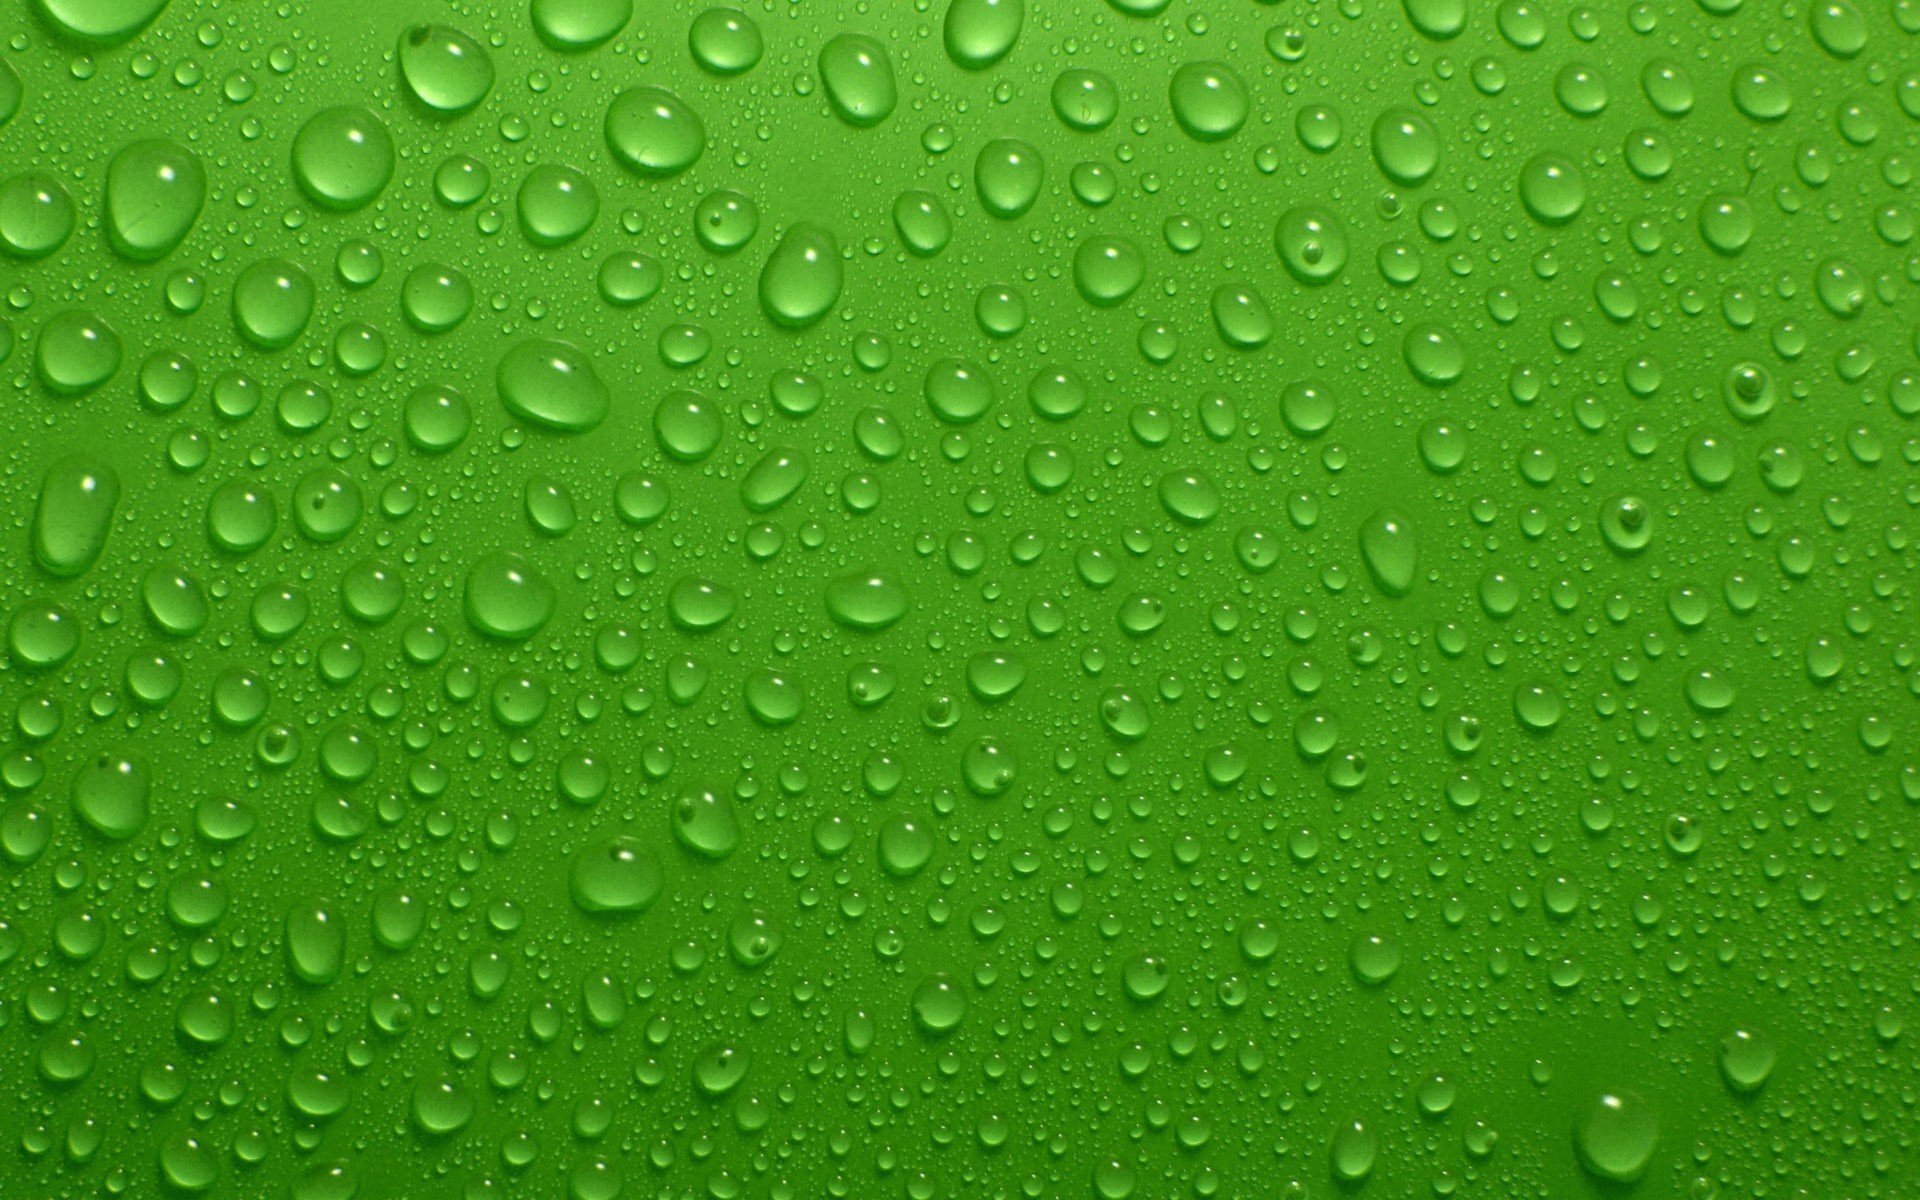 File Name 824255 Wallpapers for Green Resolution 1920x1200px